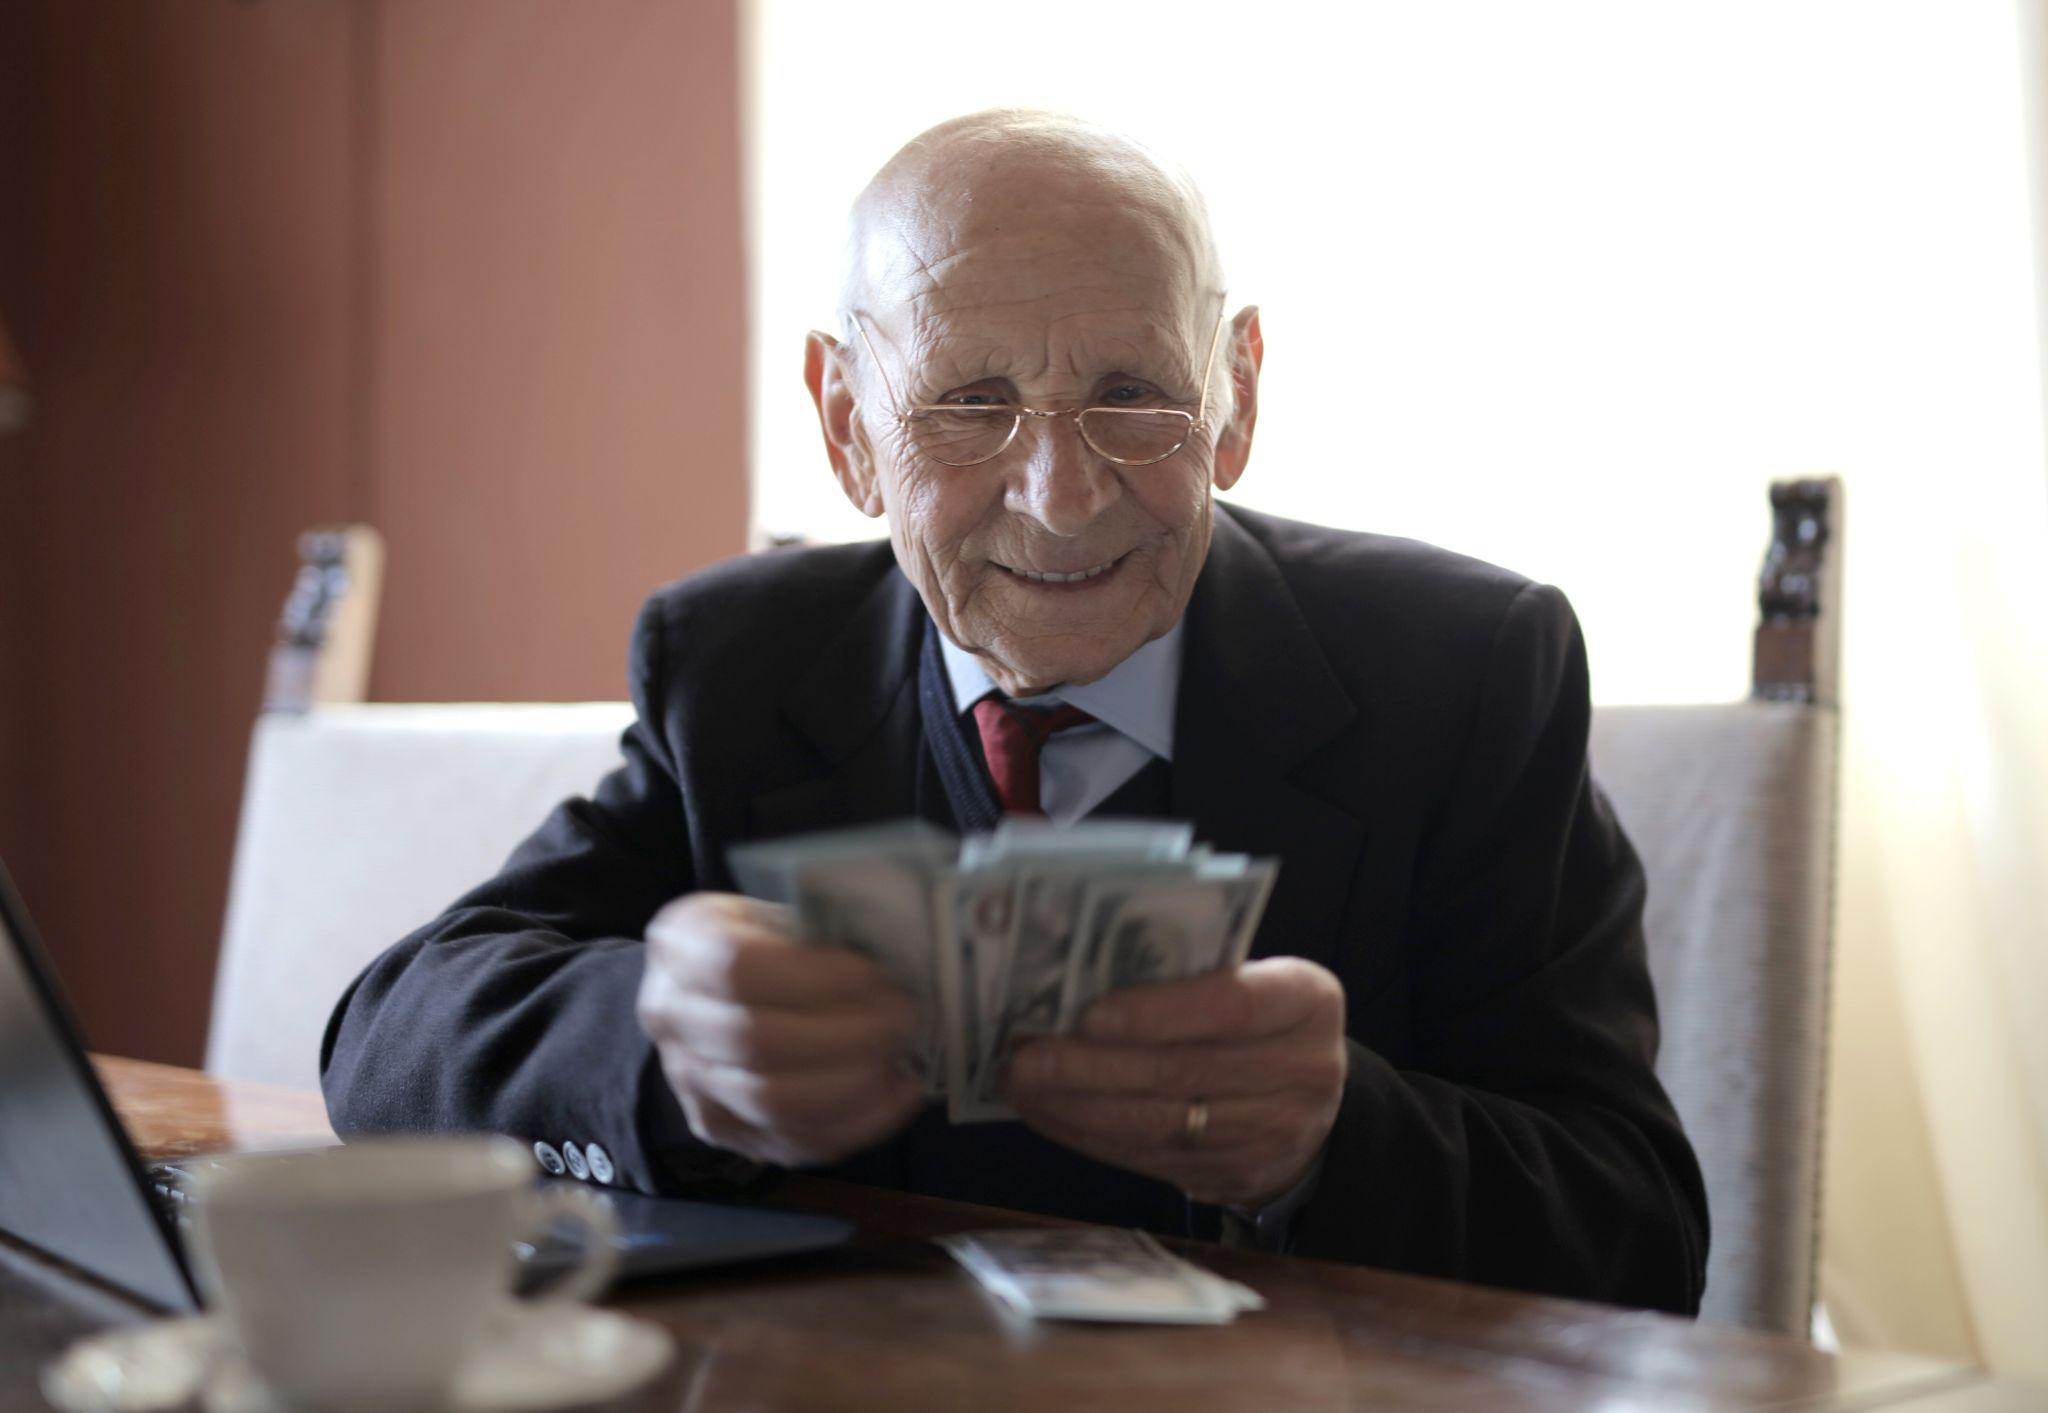 An older adult counting his pension income